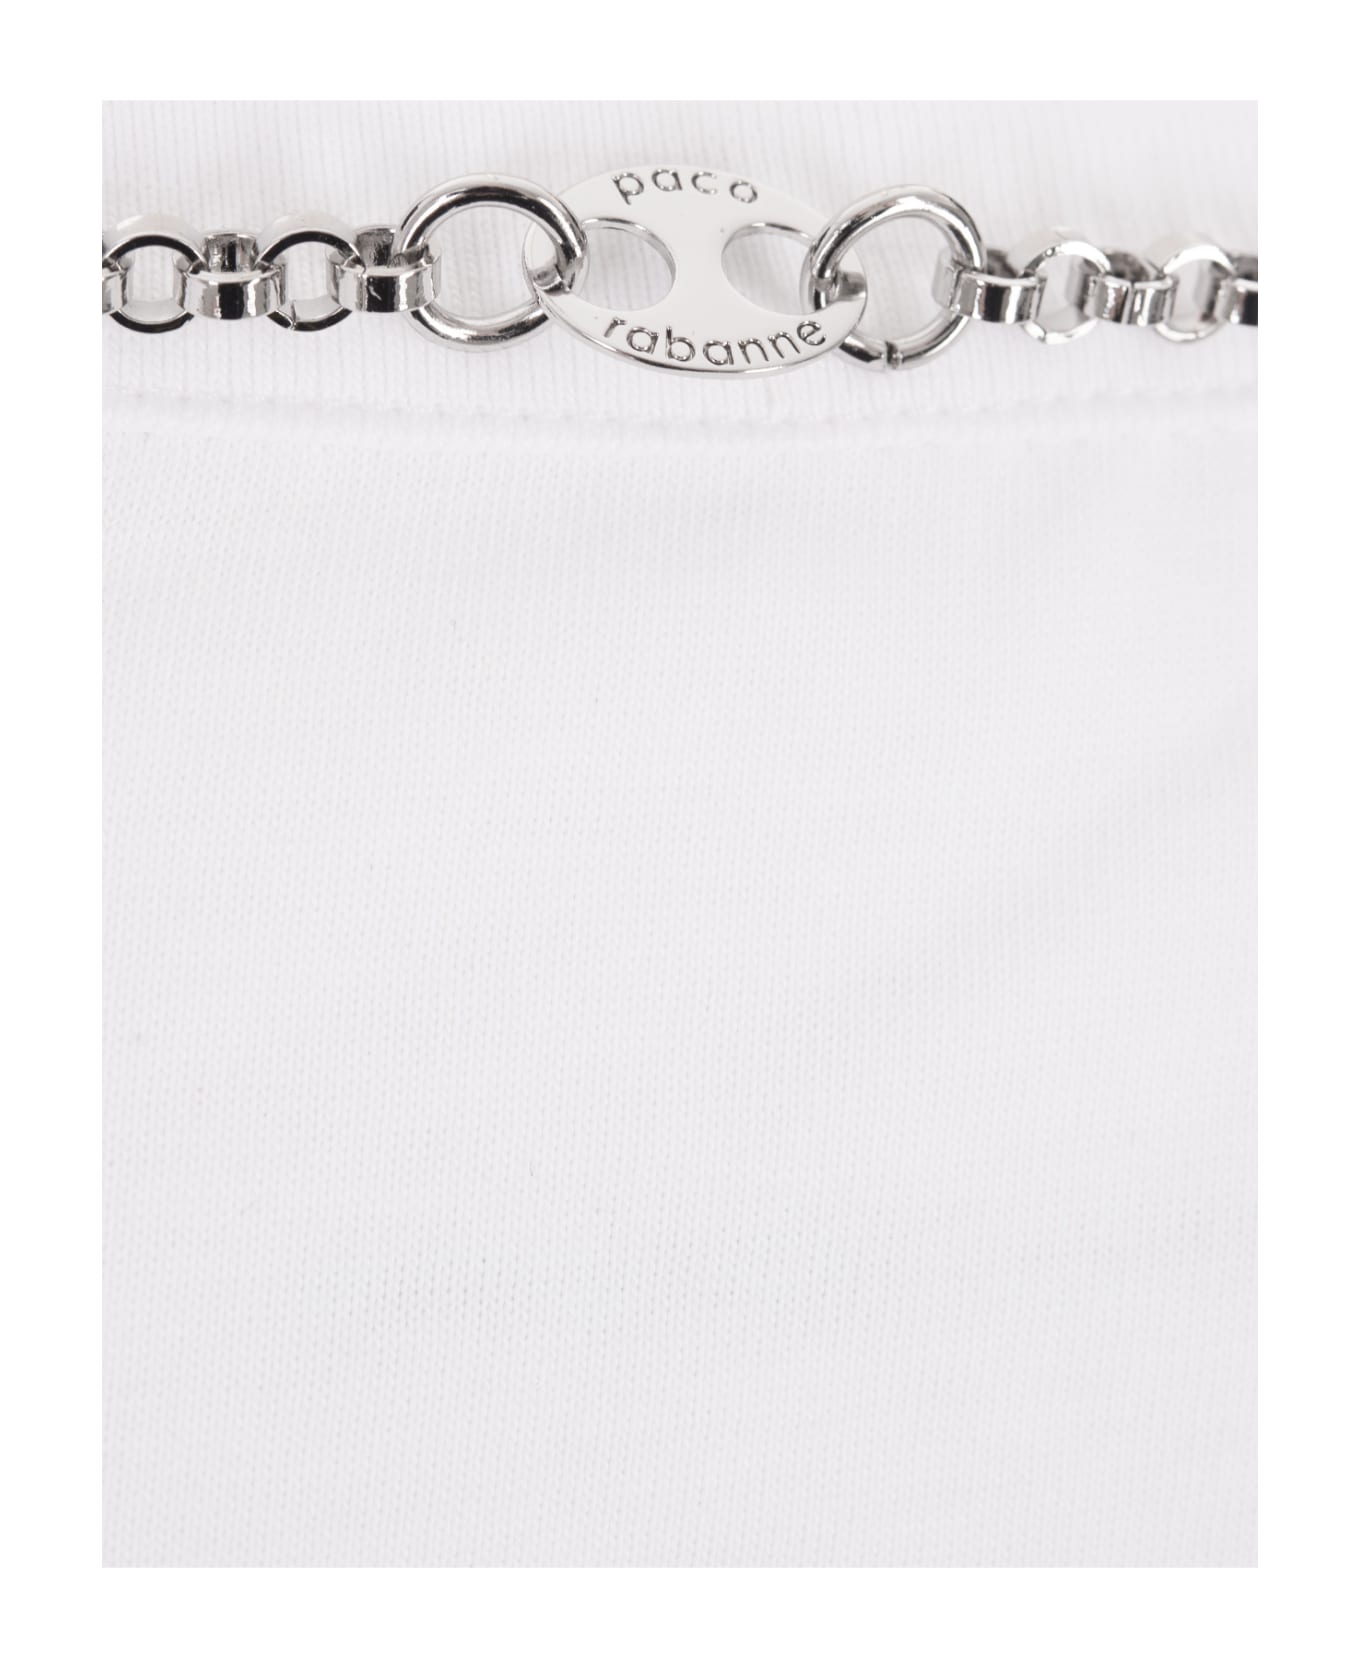 Paco Rabanne White Short T-shirt With Silver Mesh Panel - ARGENTO